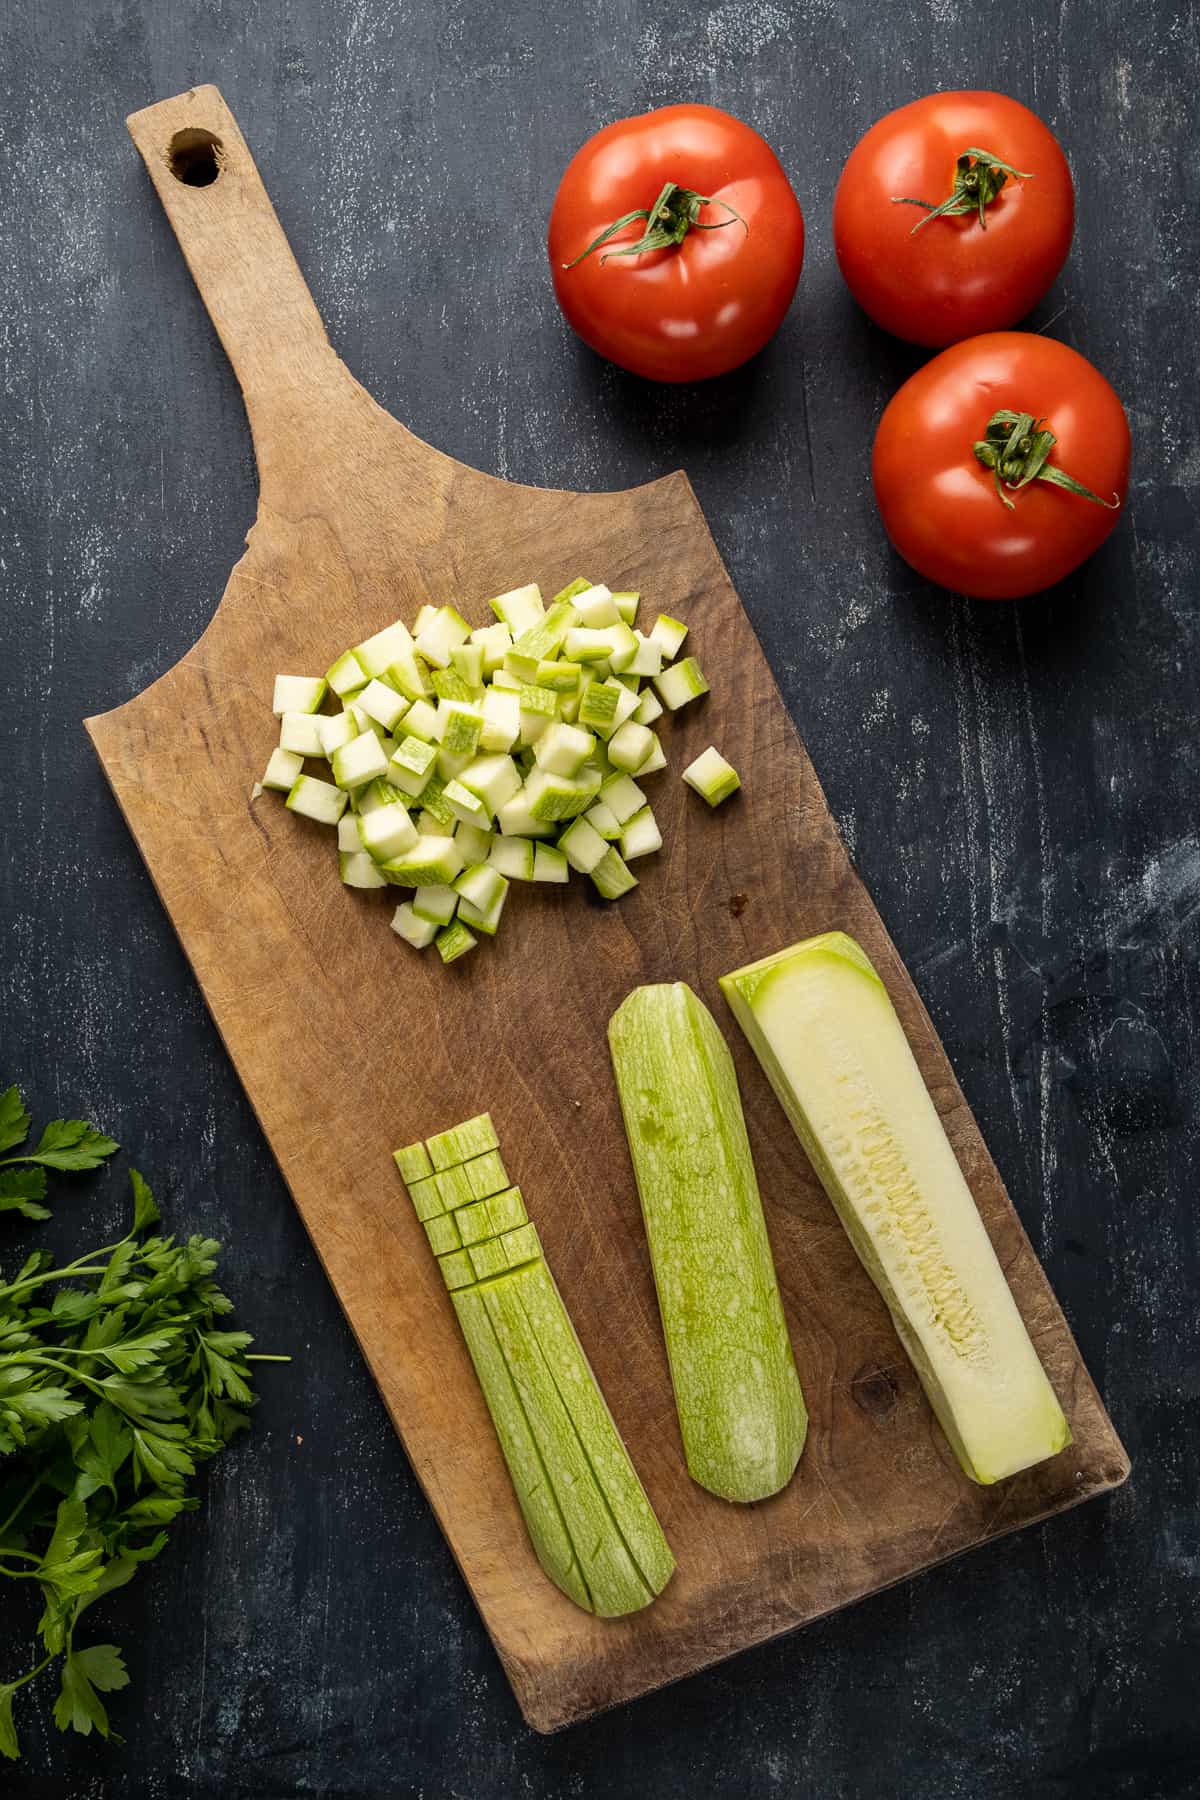 Zucchini sliced and diced on a wooden board, tomatoes and parsley on the side.